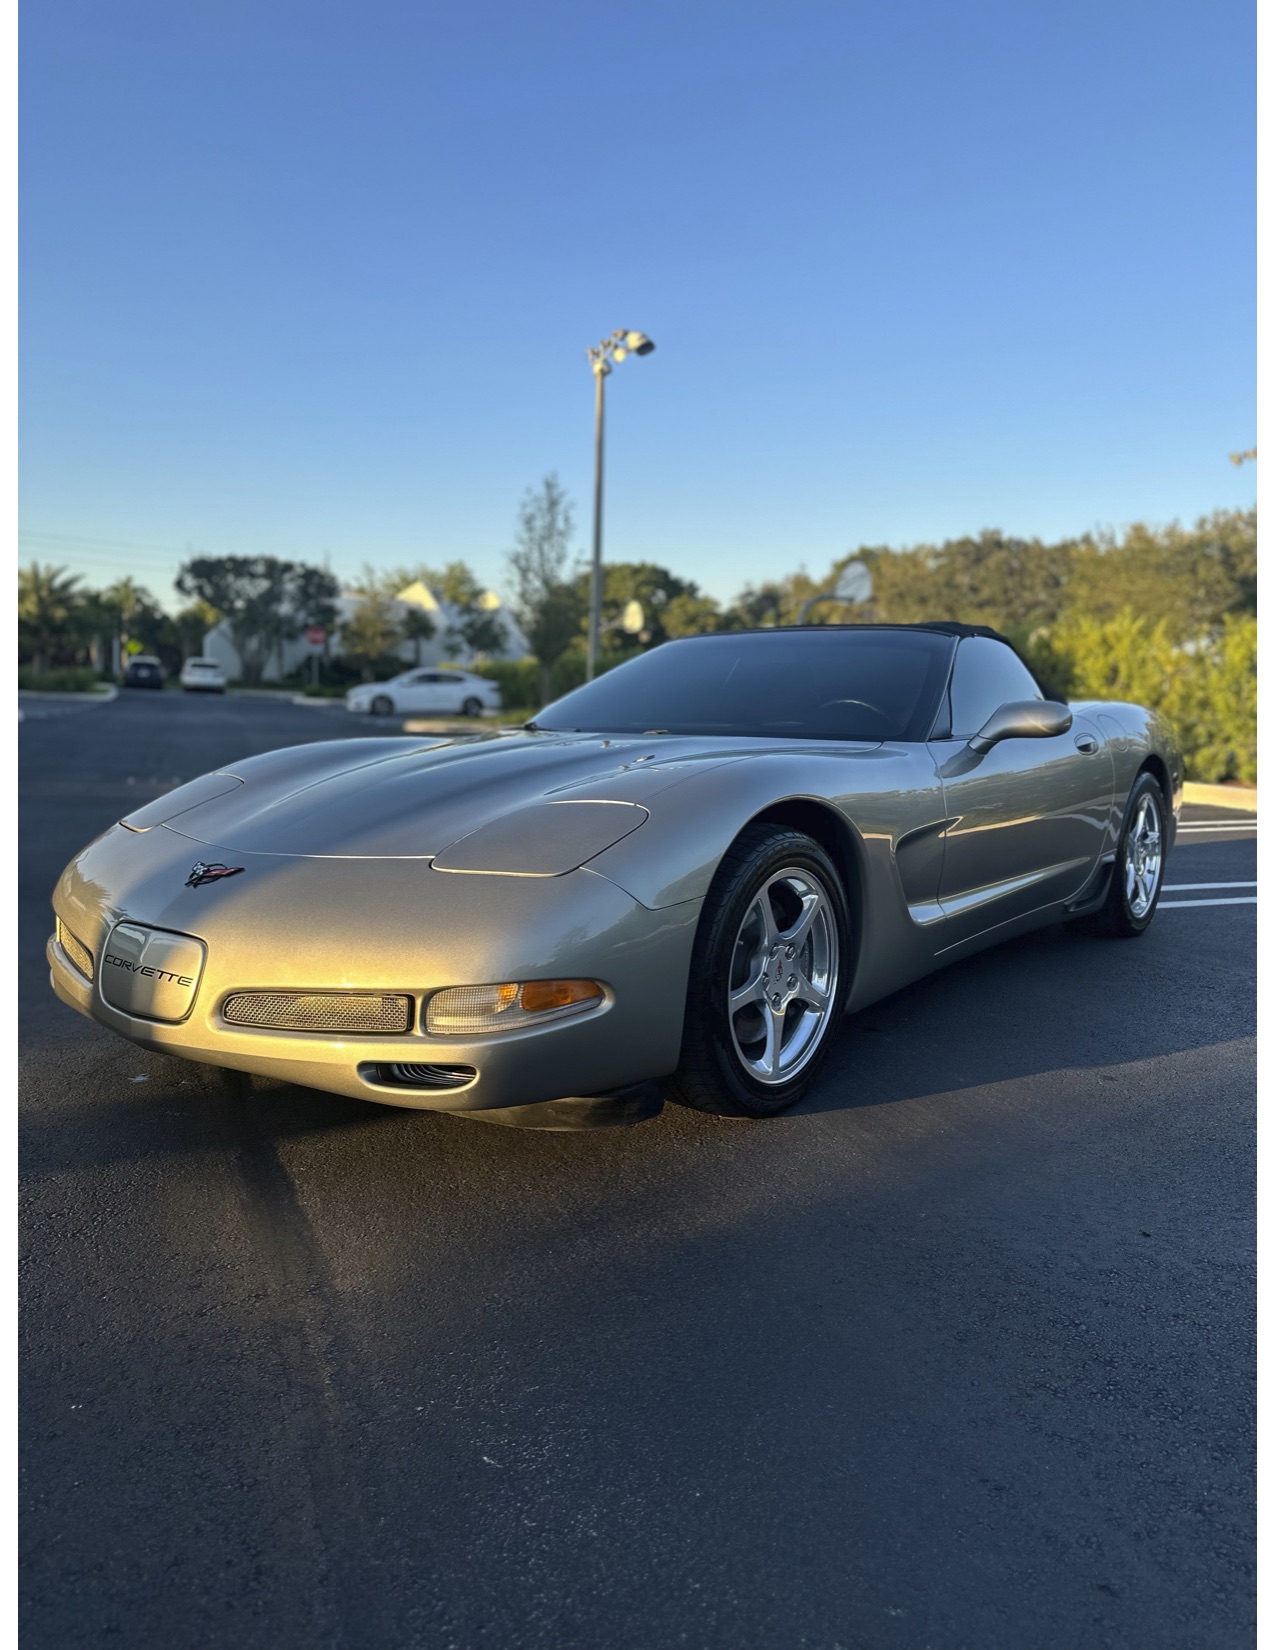 Used Convertibles for Sale Right Now - Autotrader